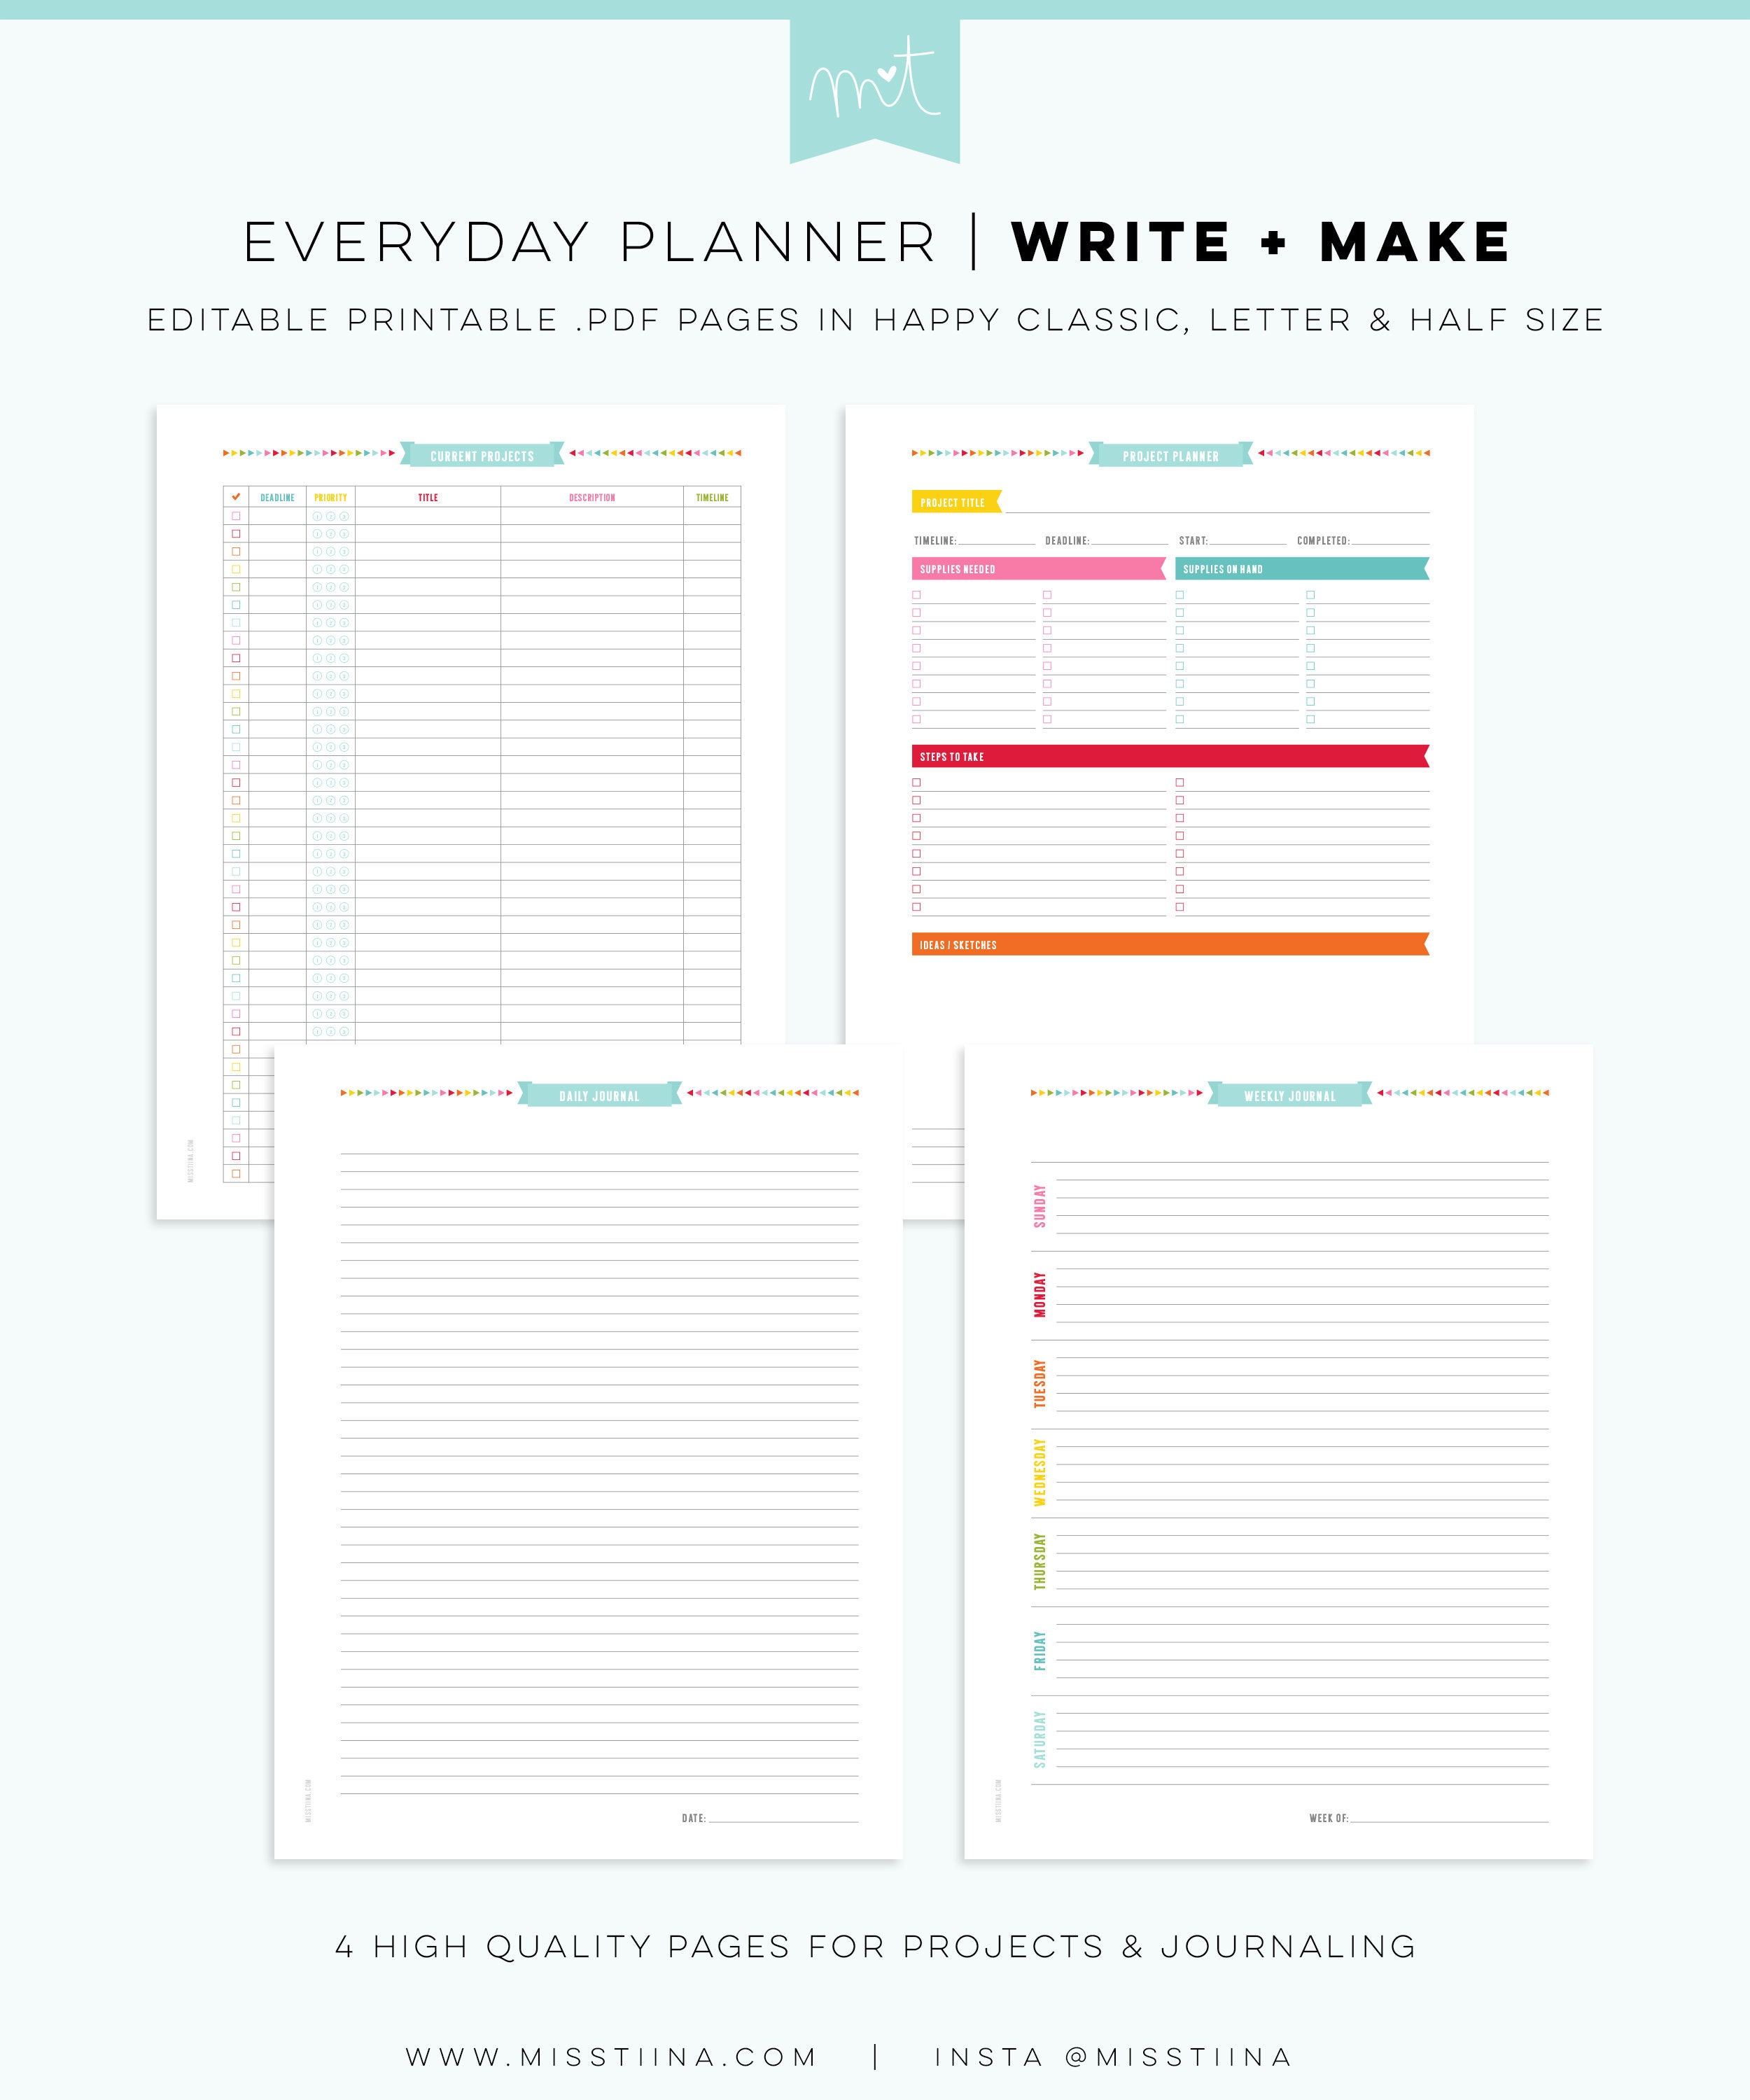 S6 • Write + Make EDITABLE PDF Everyday Planner Printables Happy Classic  Letter Half Free Font current project planning daily weekly journal